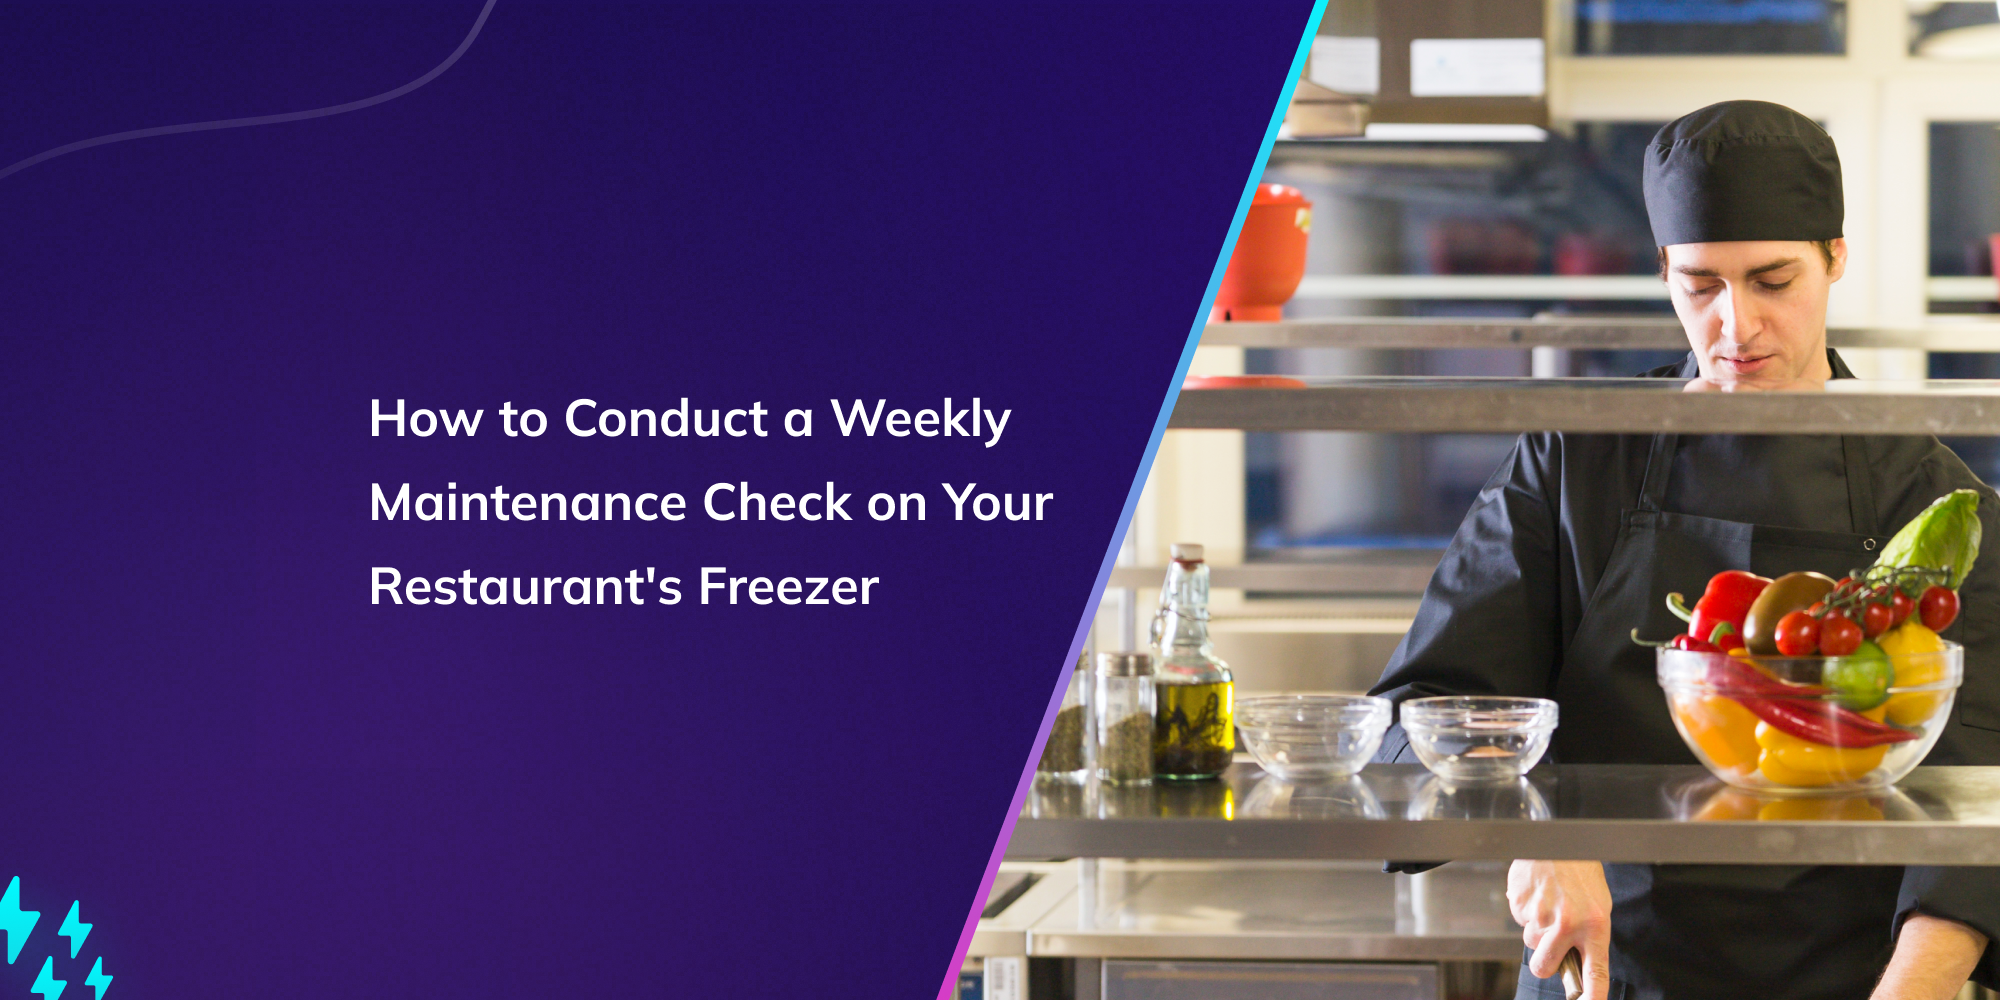 How to Conduct a Weekly Maintenance Check on Your Restaurant's Freezer